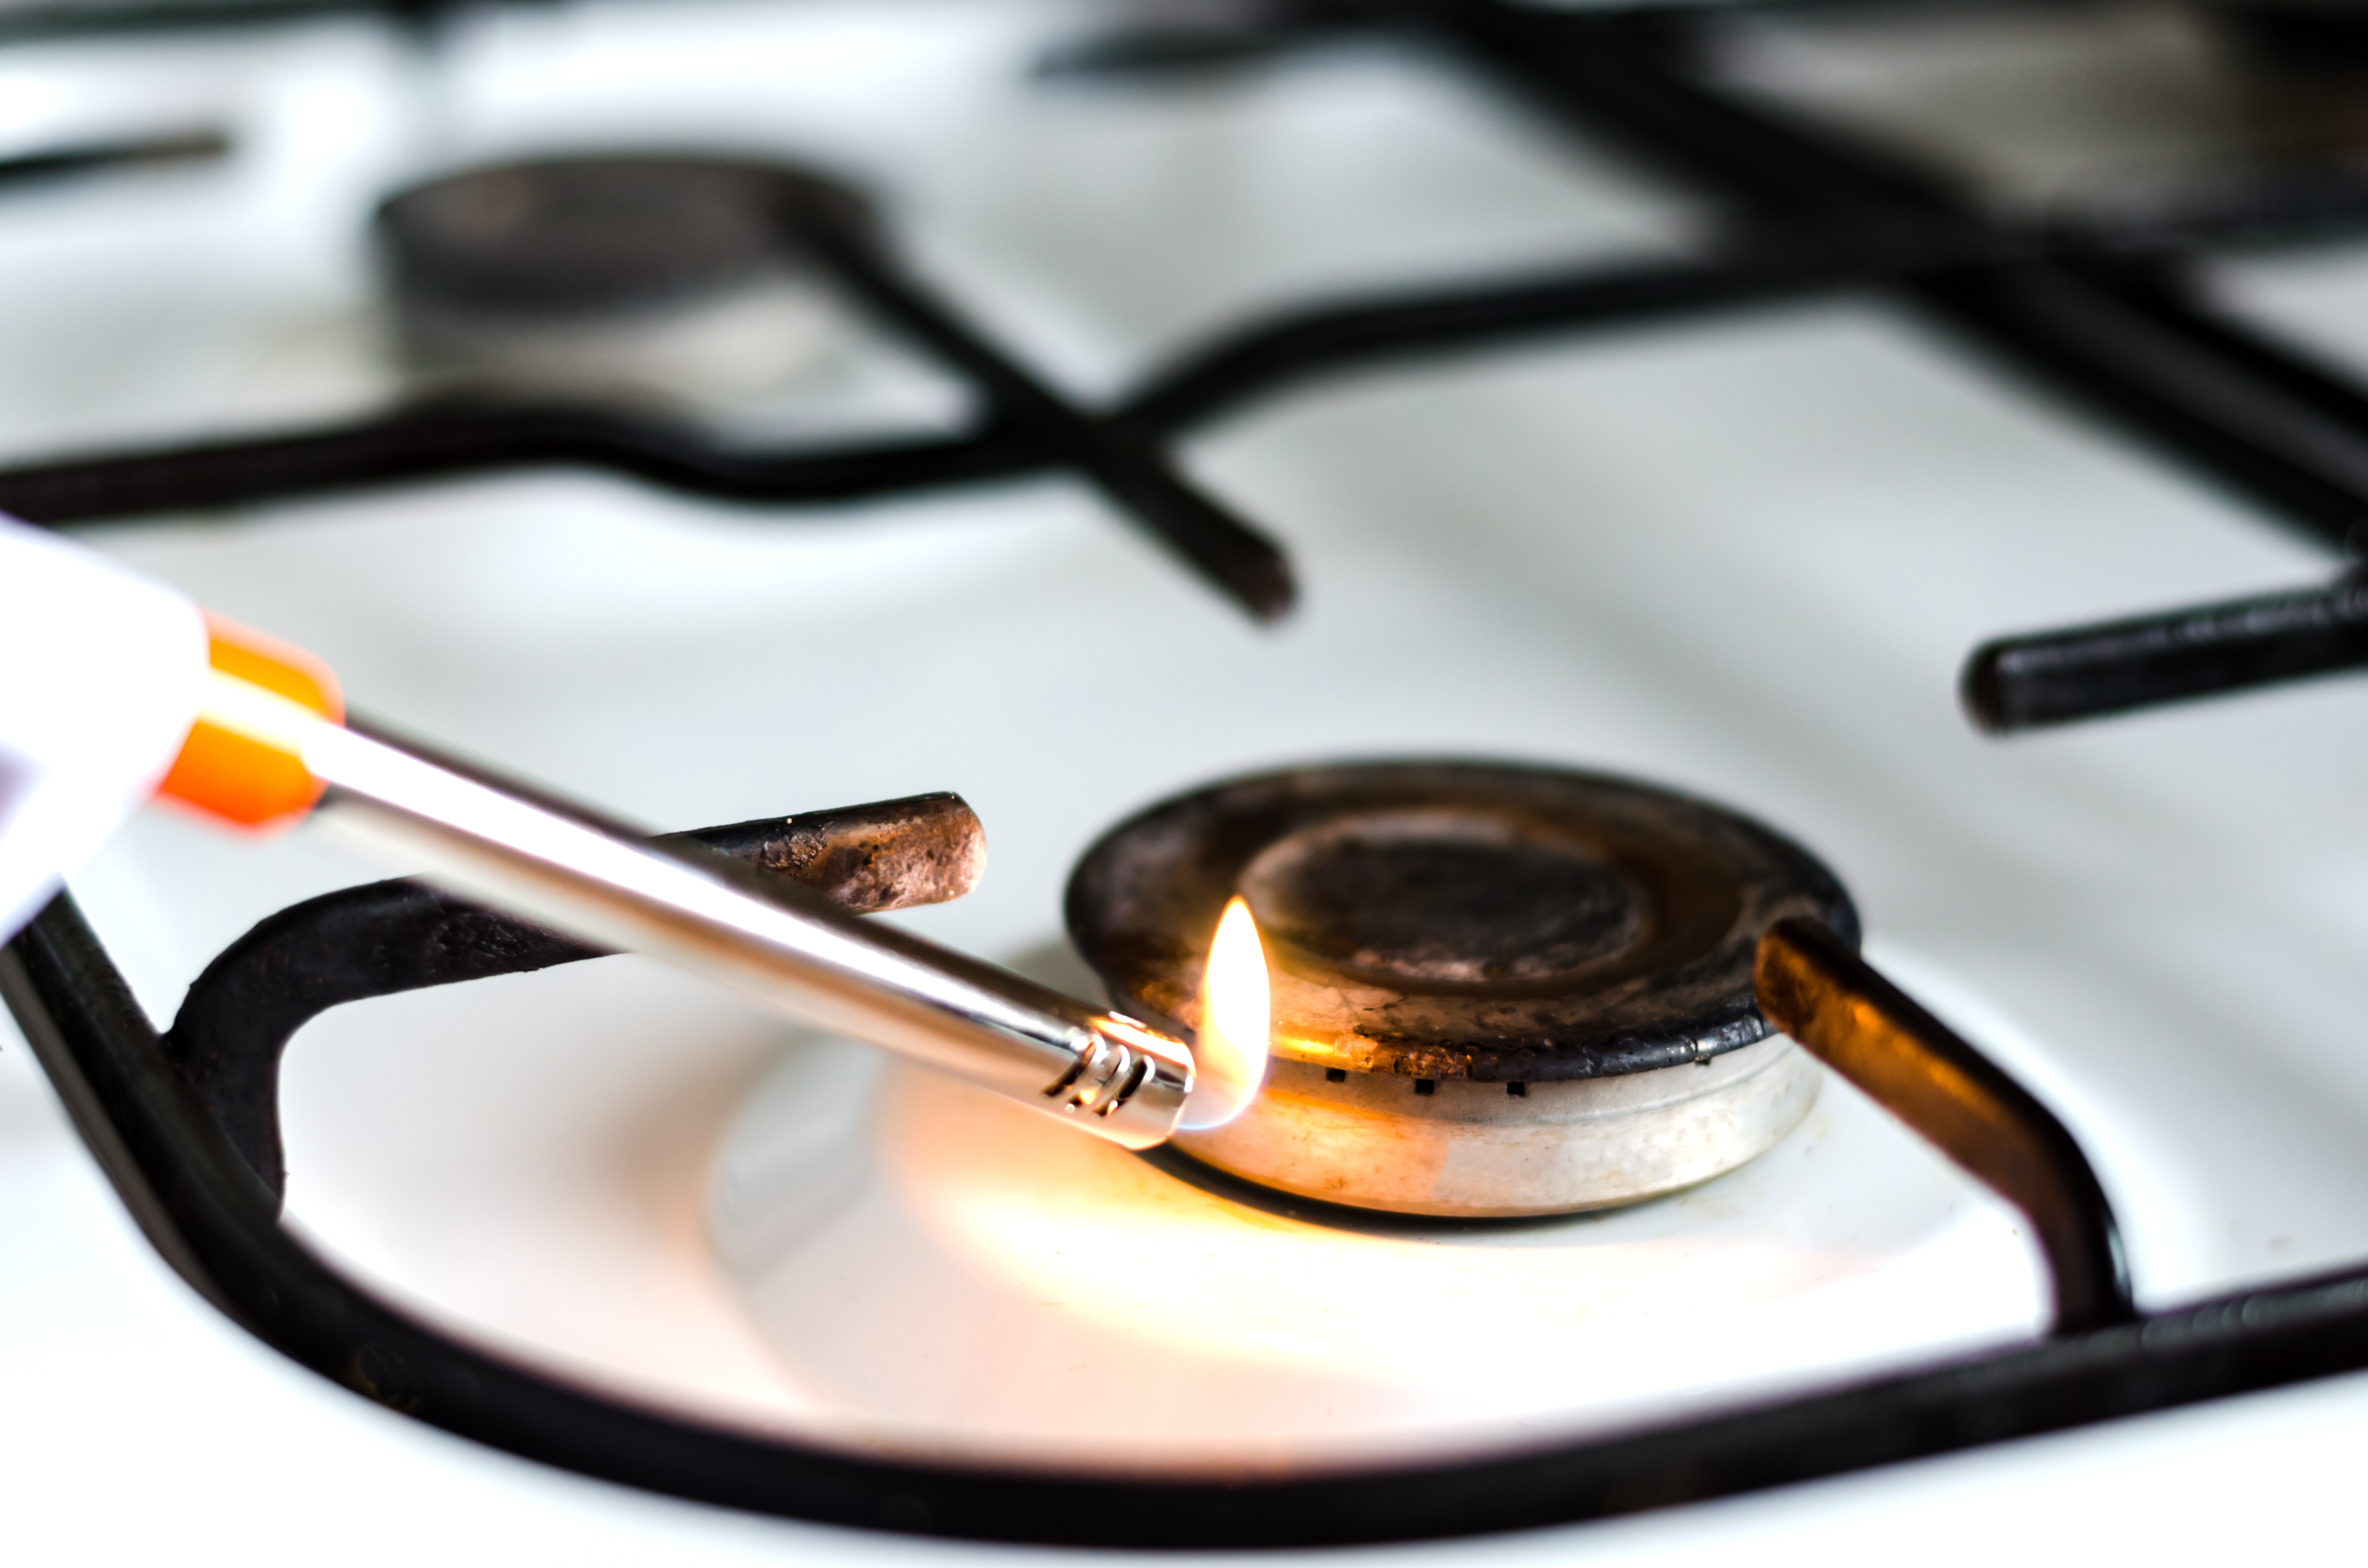 How to Diagnose The Most Common Electric Stovetop Problems